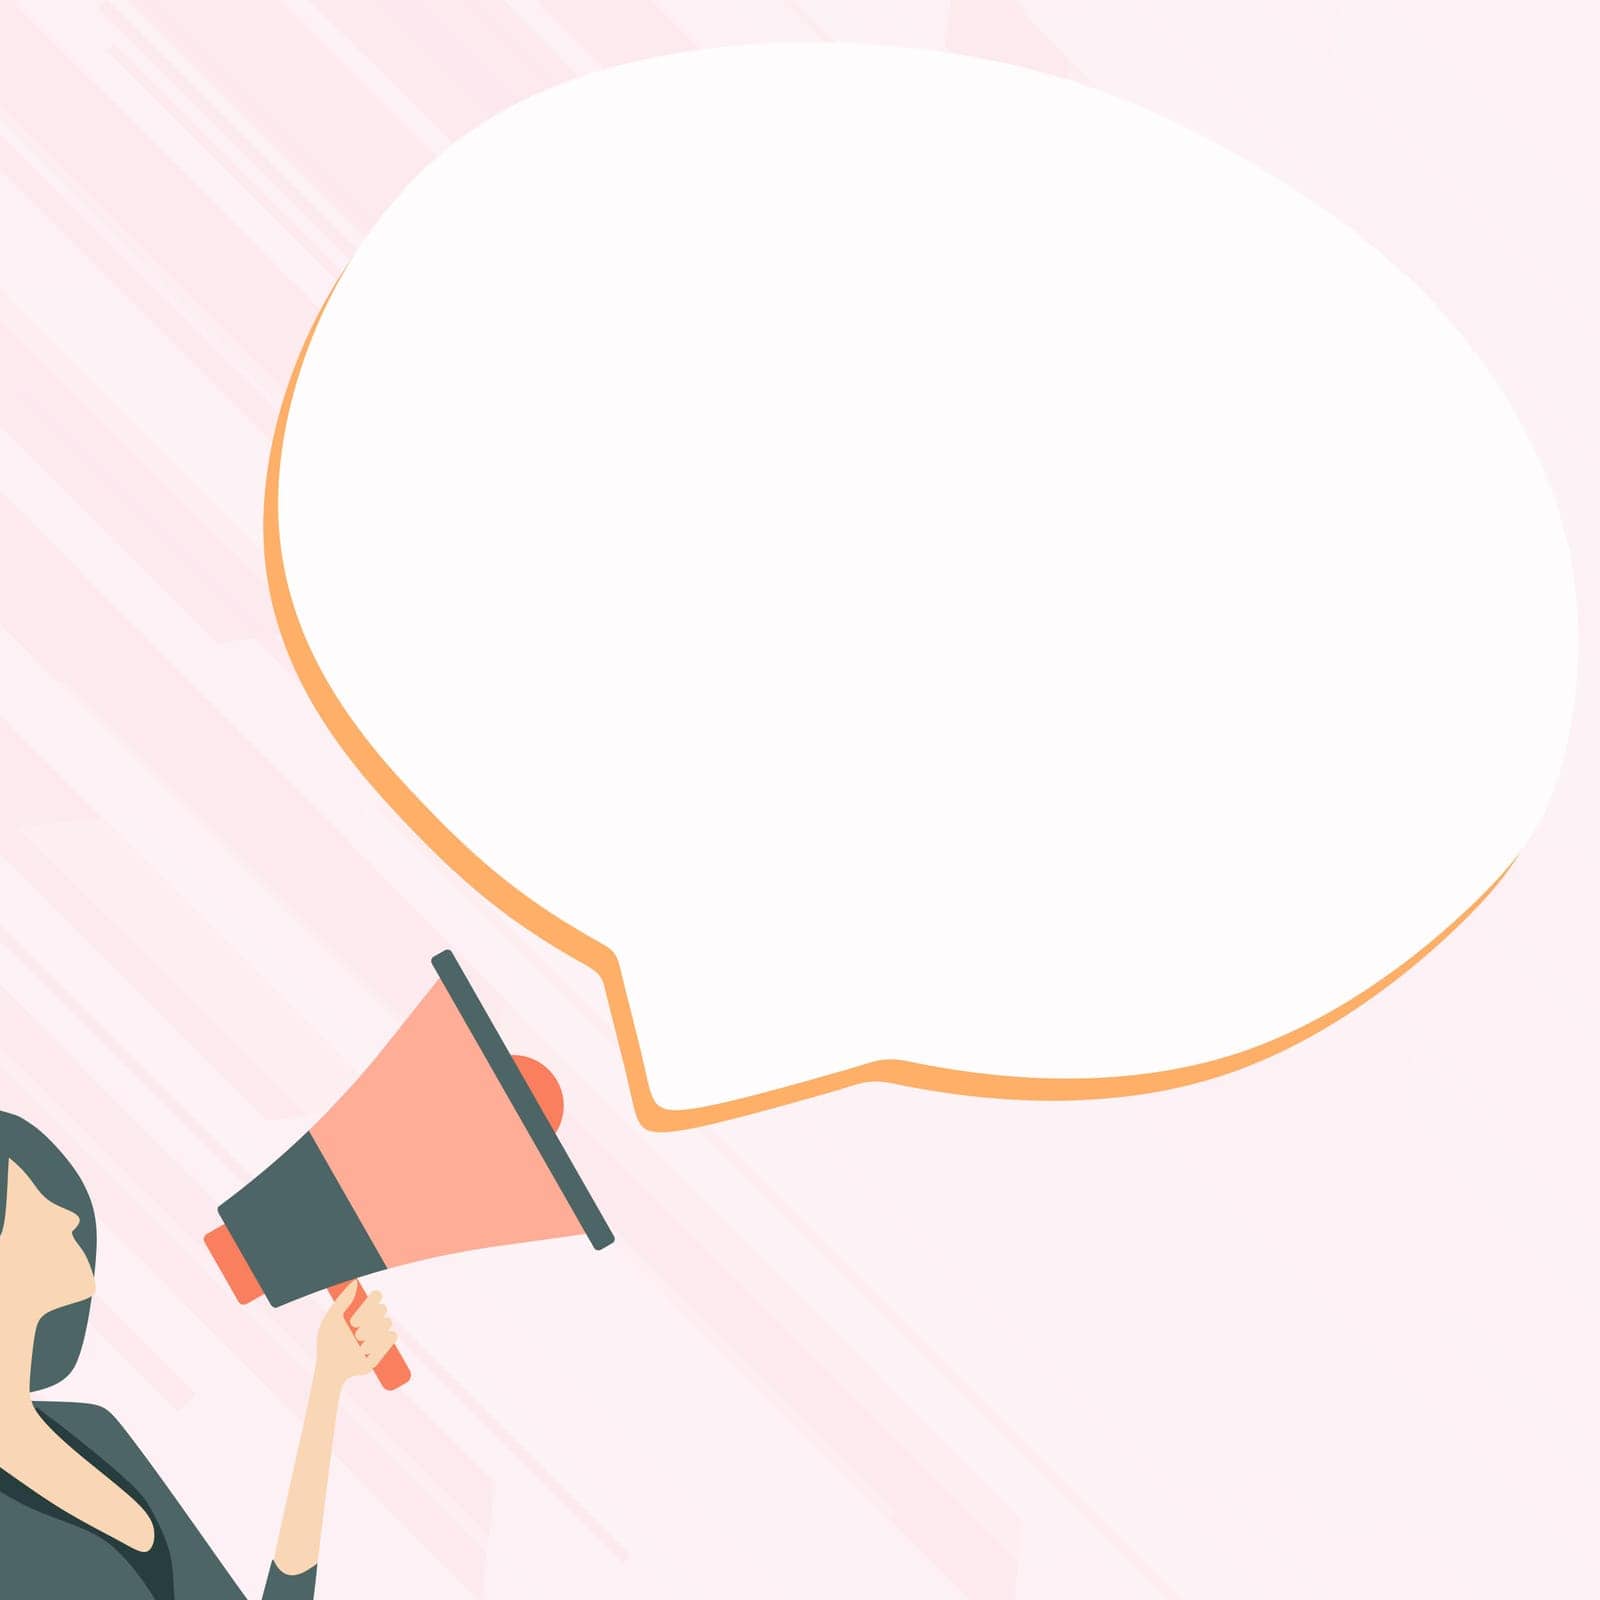 Woman Presenting Text with megaphone. Dialog box on brihgt background.